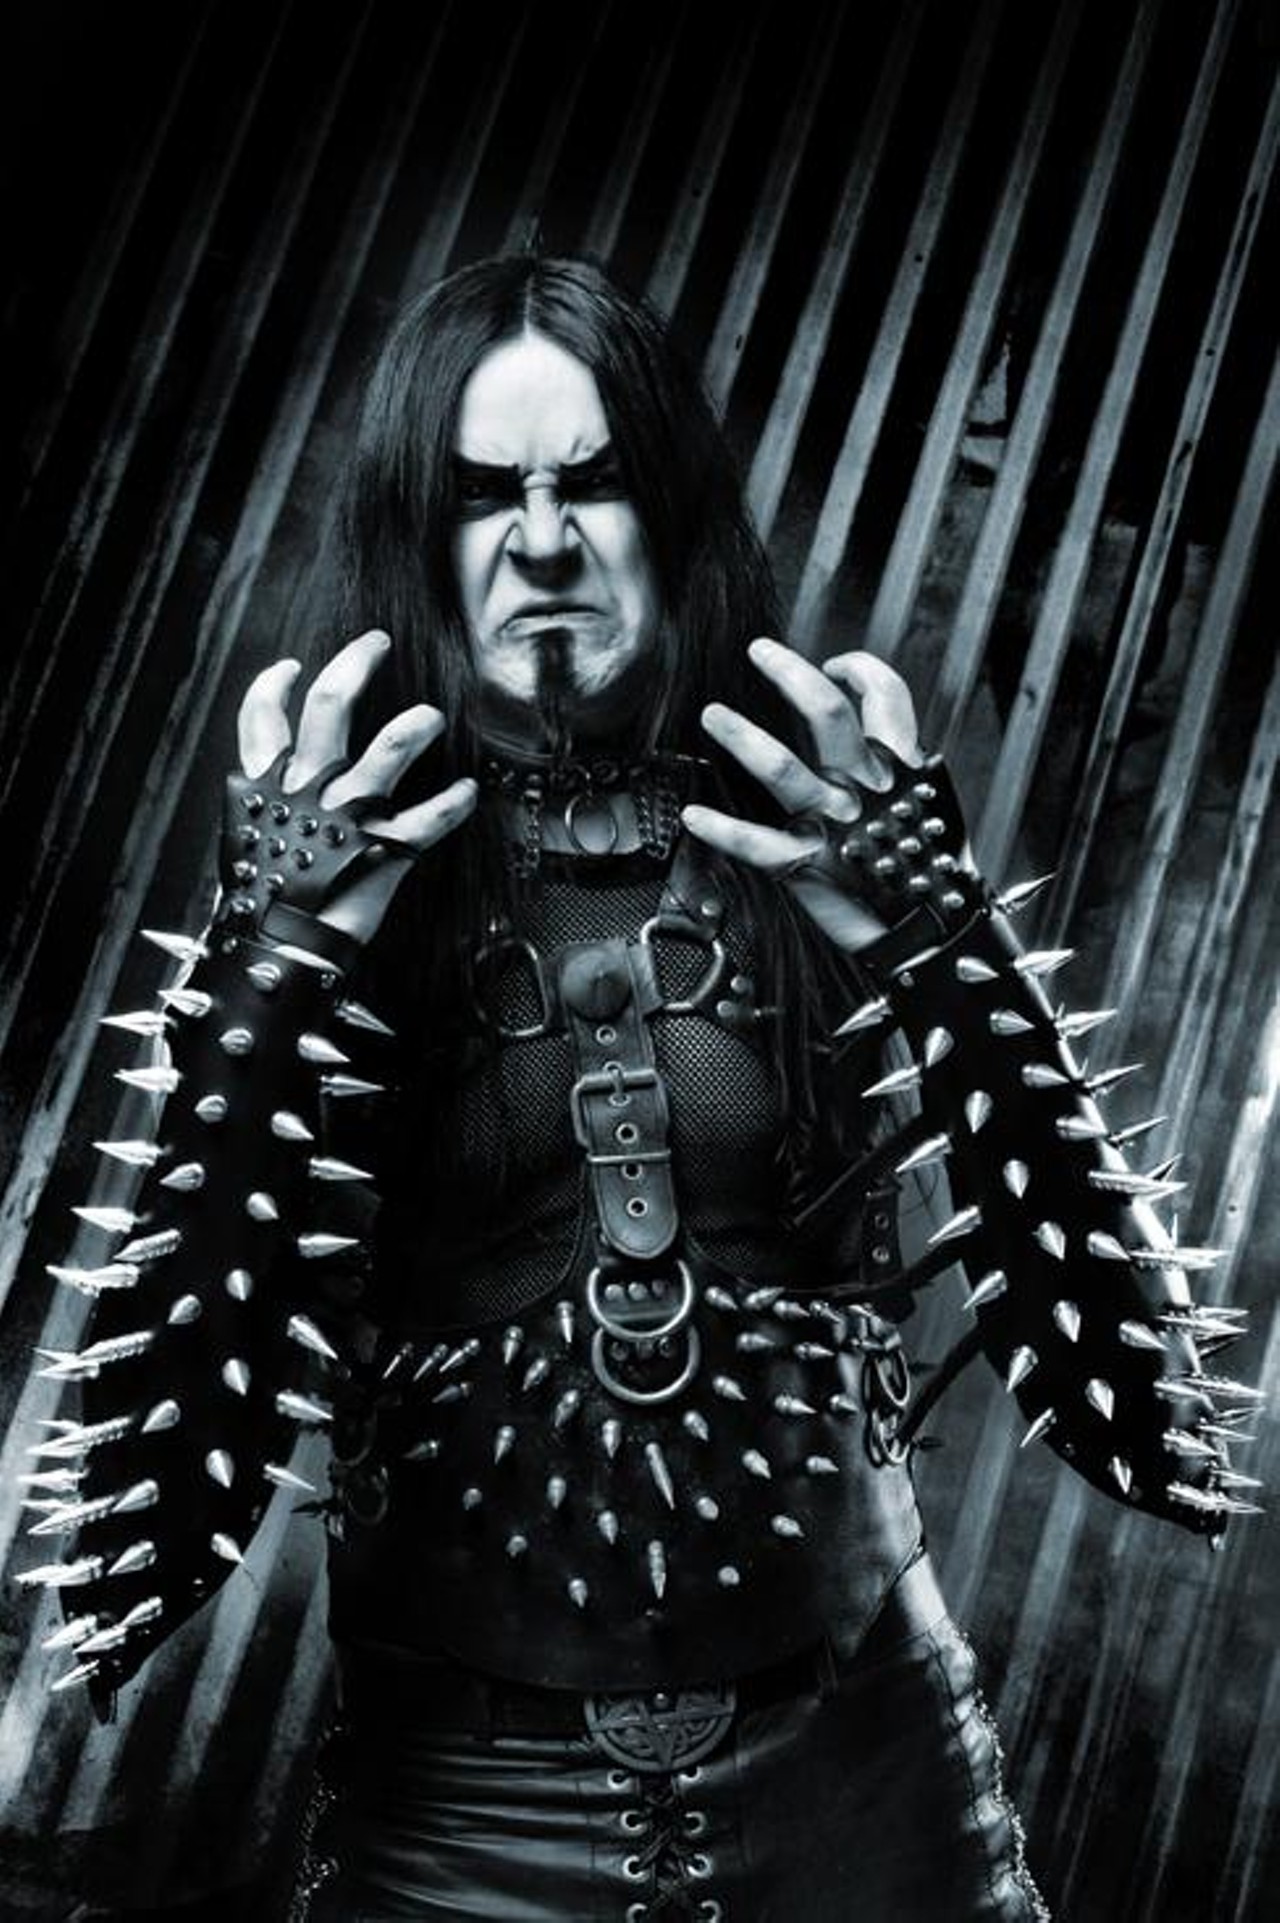 Stian Tomt Thoresen, better known as Shagrath from DImmu Borgir, takes a minimalist approach to his corpse paint, relying mostly on his spikes for a unique look.